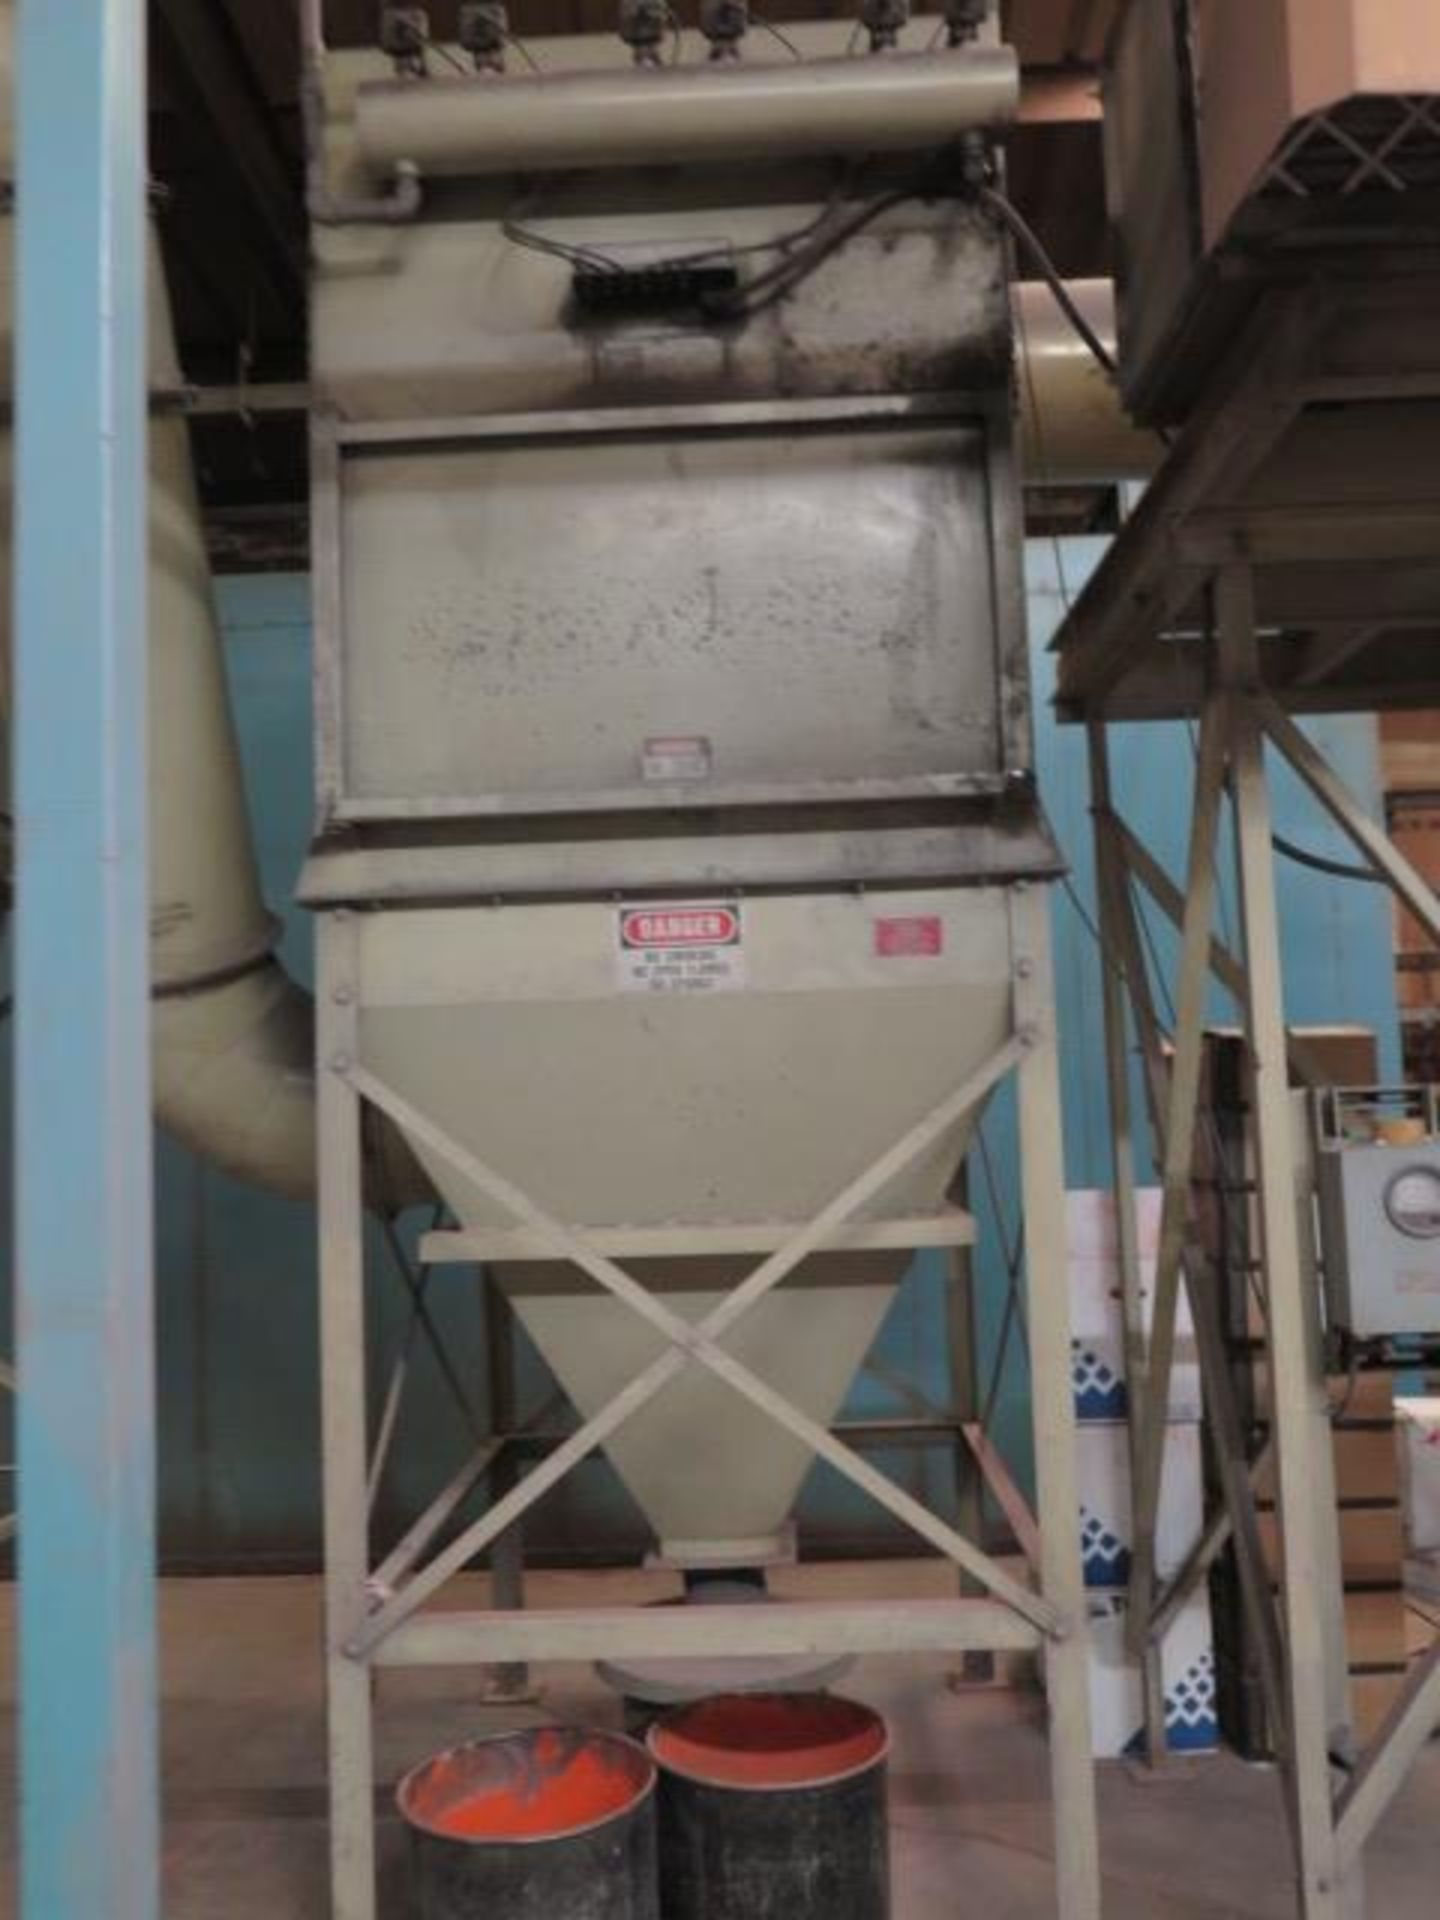 Gema Volstatic Powder Paint Spray Booth w/ Cyclone Style Dust Collection System, Pass Thru - Image 23 of 26